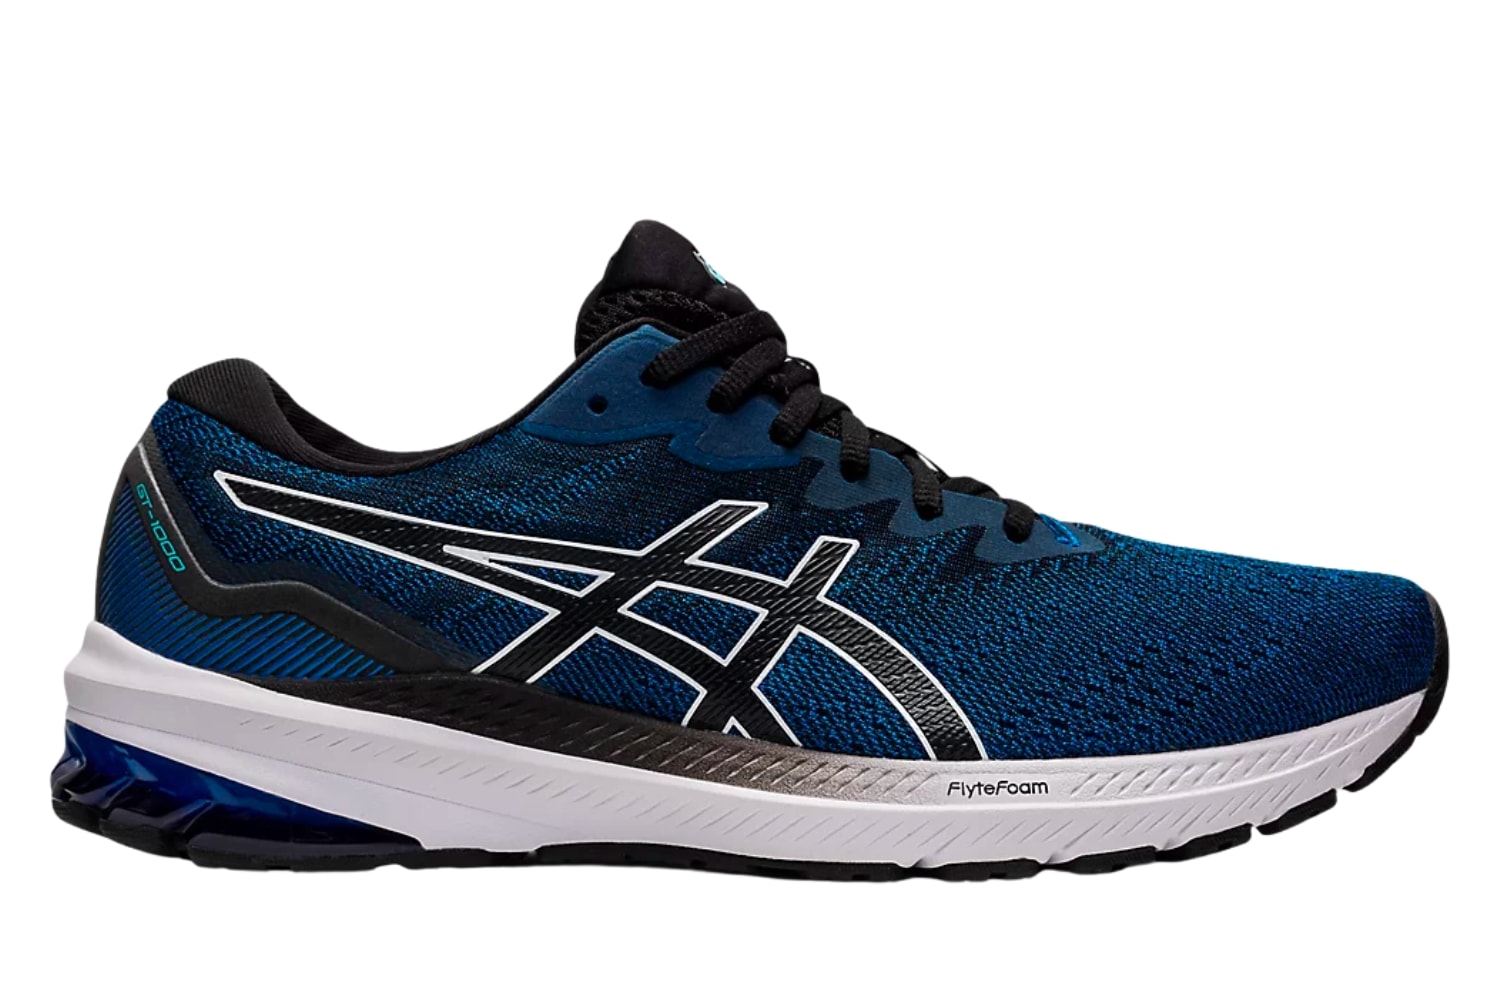 Asics GT 1000 11 review